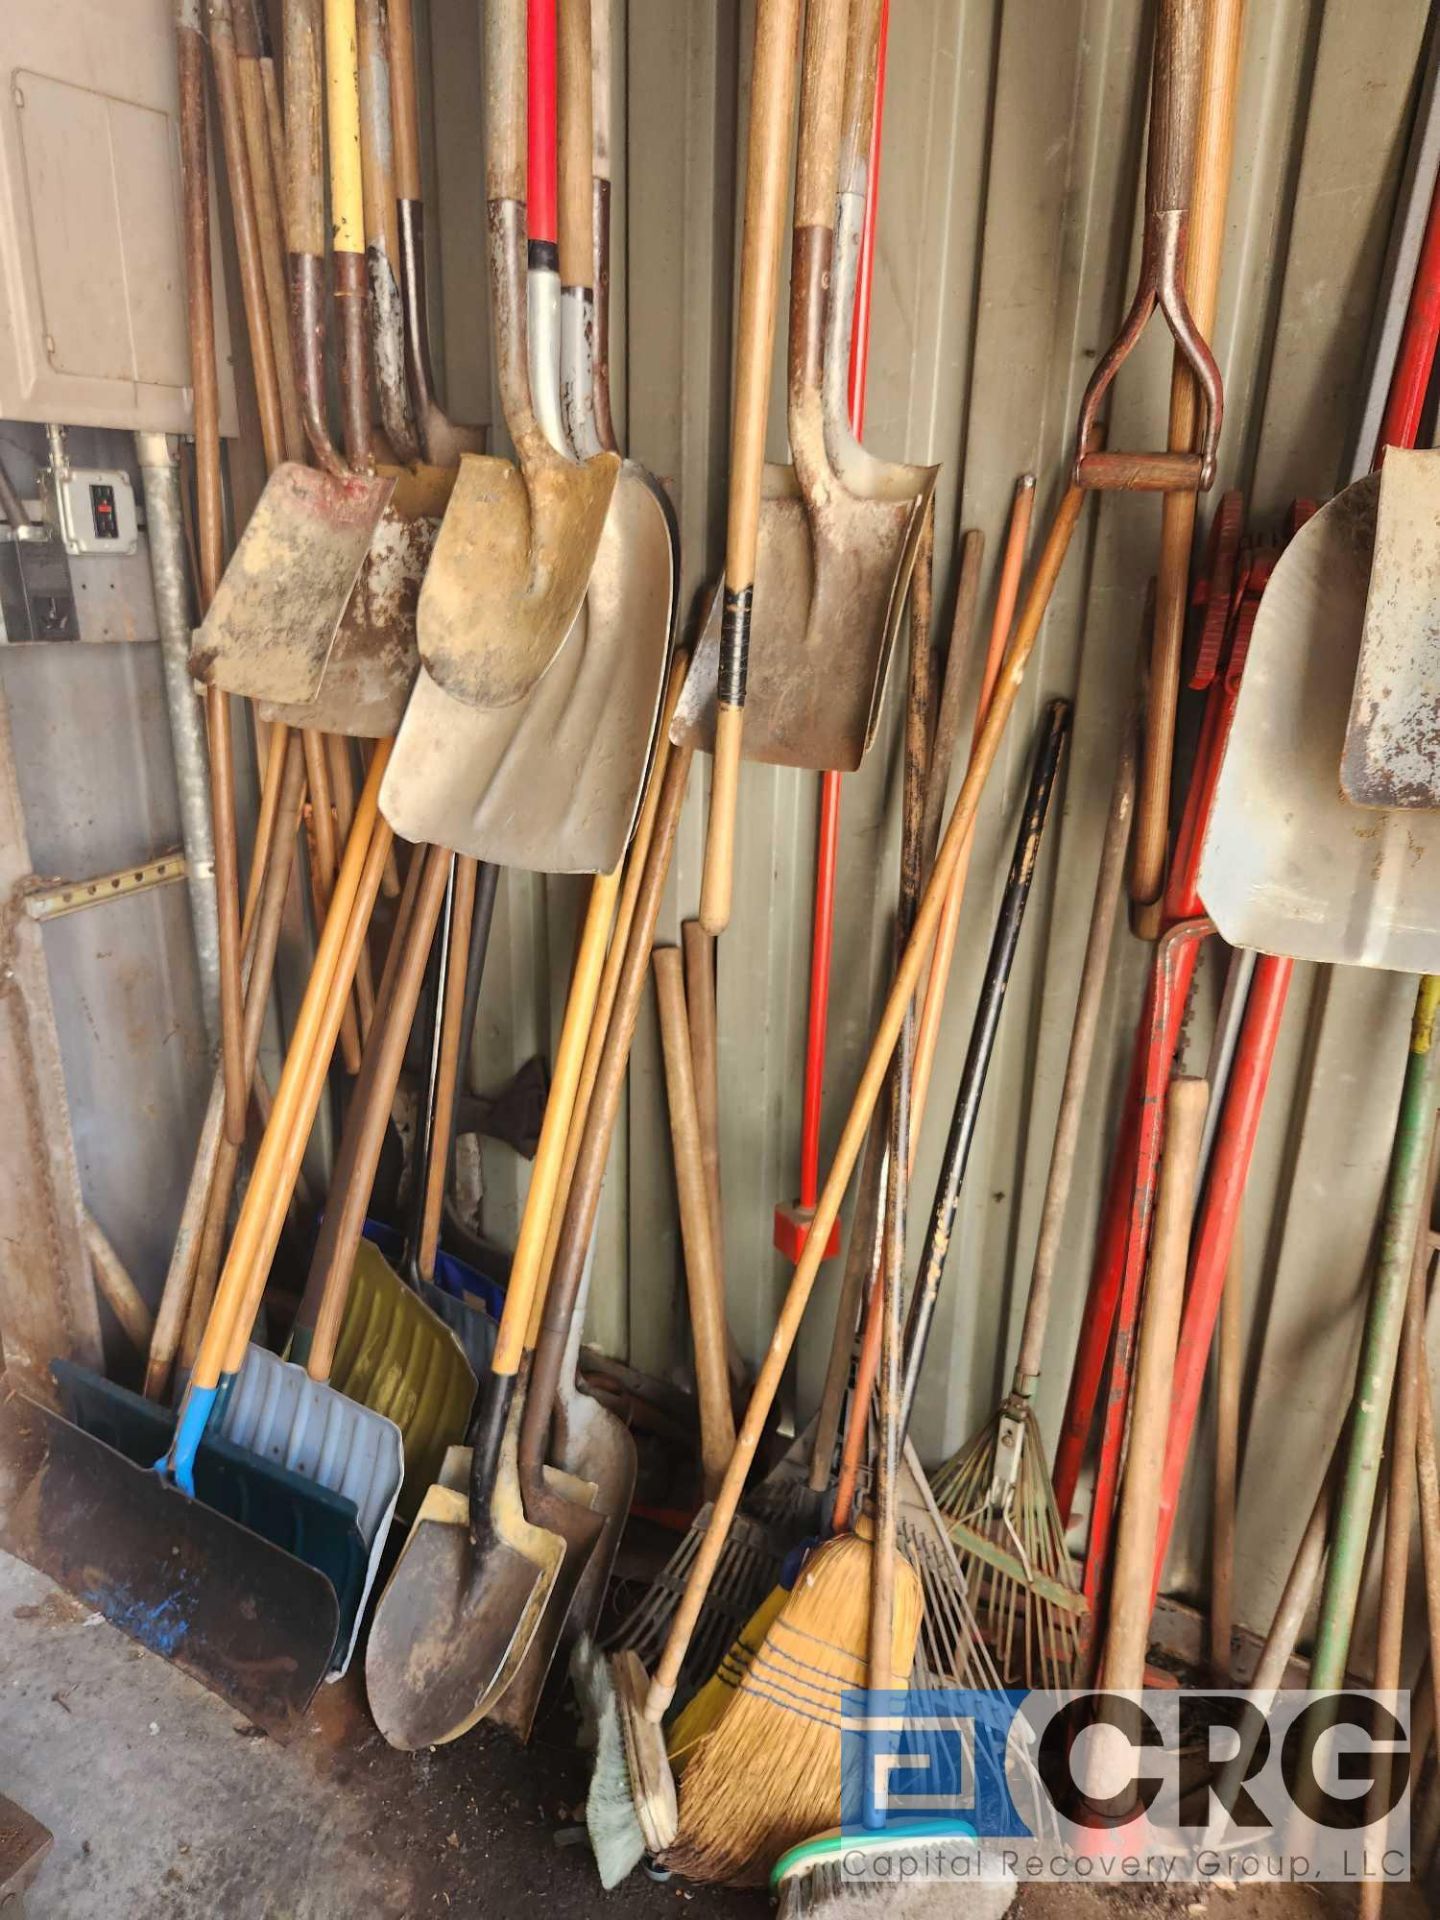 Assorted Landscaping Equipment - Image 3 of 3